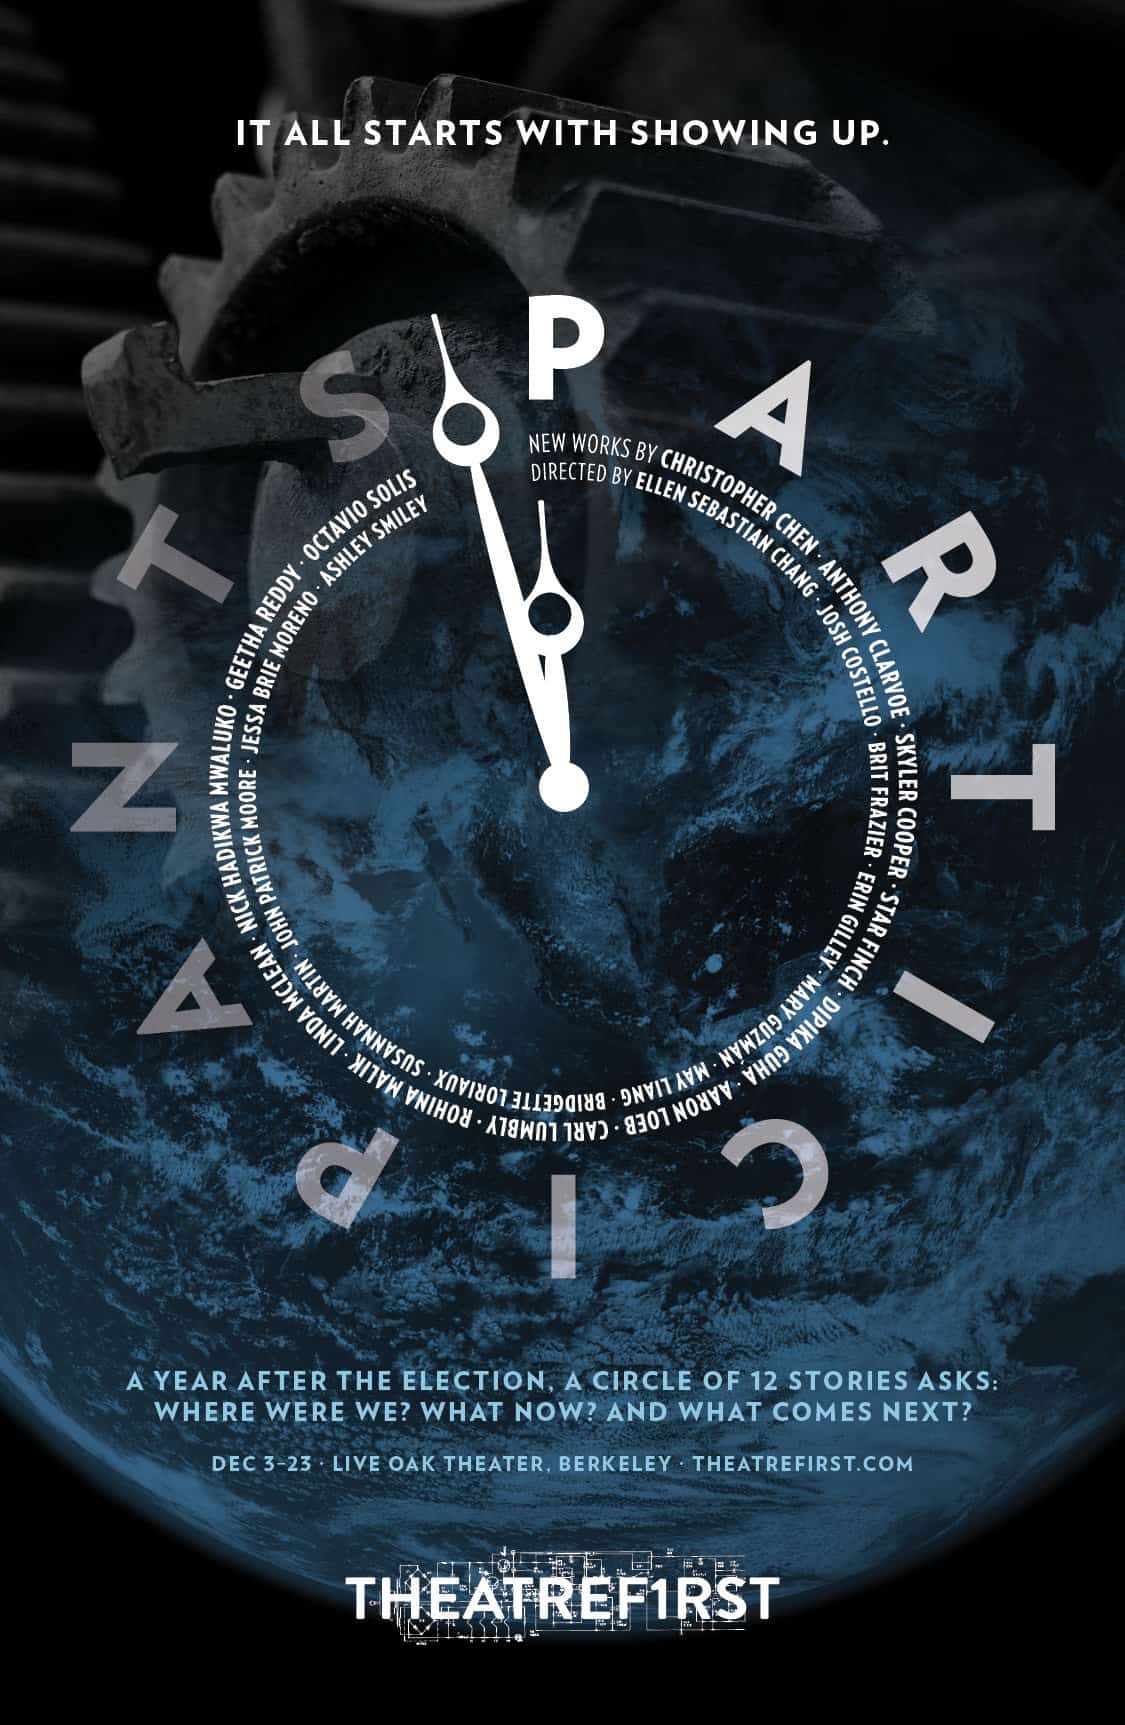 Poster for "Participants," a collection of short plays at TheatreFIRST. In the background is a subtle image of industrial gears blending into a view of the Earth from space. In the foreground, the letters of "PARTICIPANTS" are spread out like numbers on a clock, with the hands of the clock positioned at 11:58, reminiscent of the Doomsday Clock.